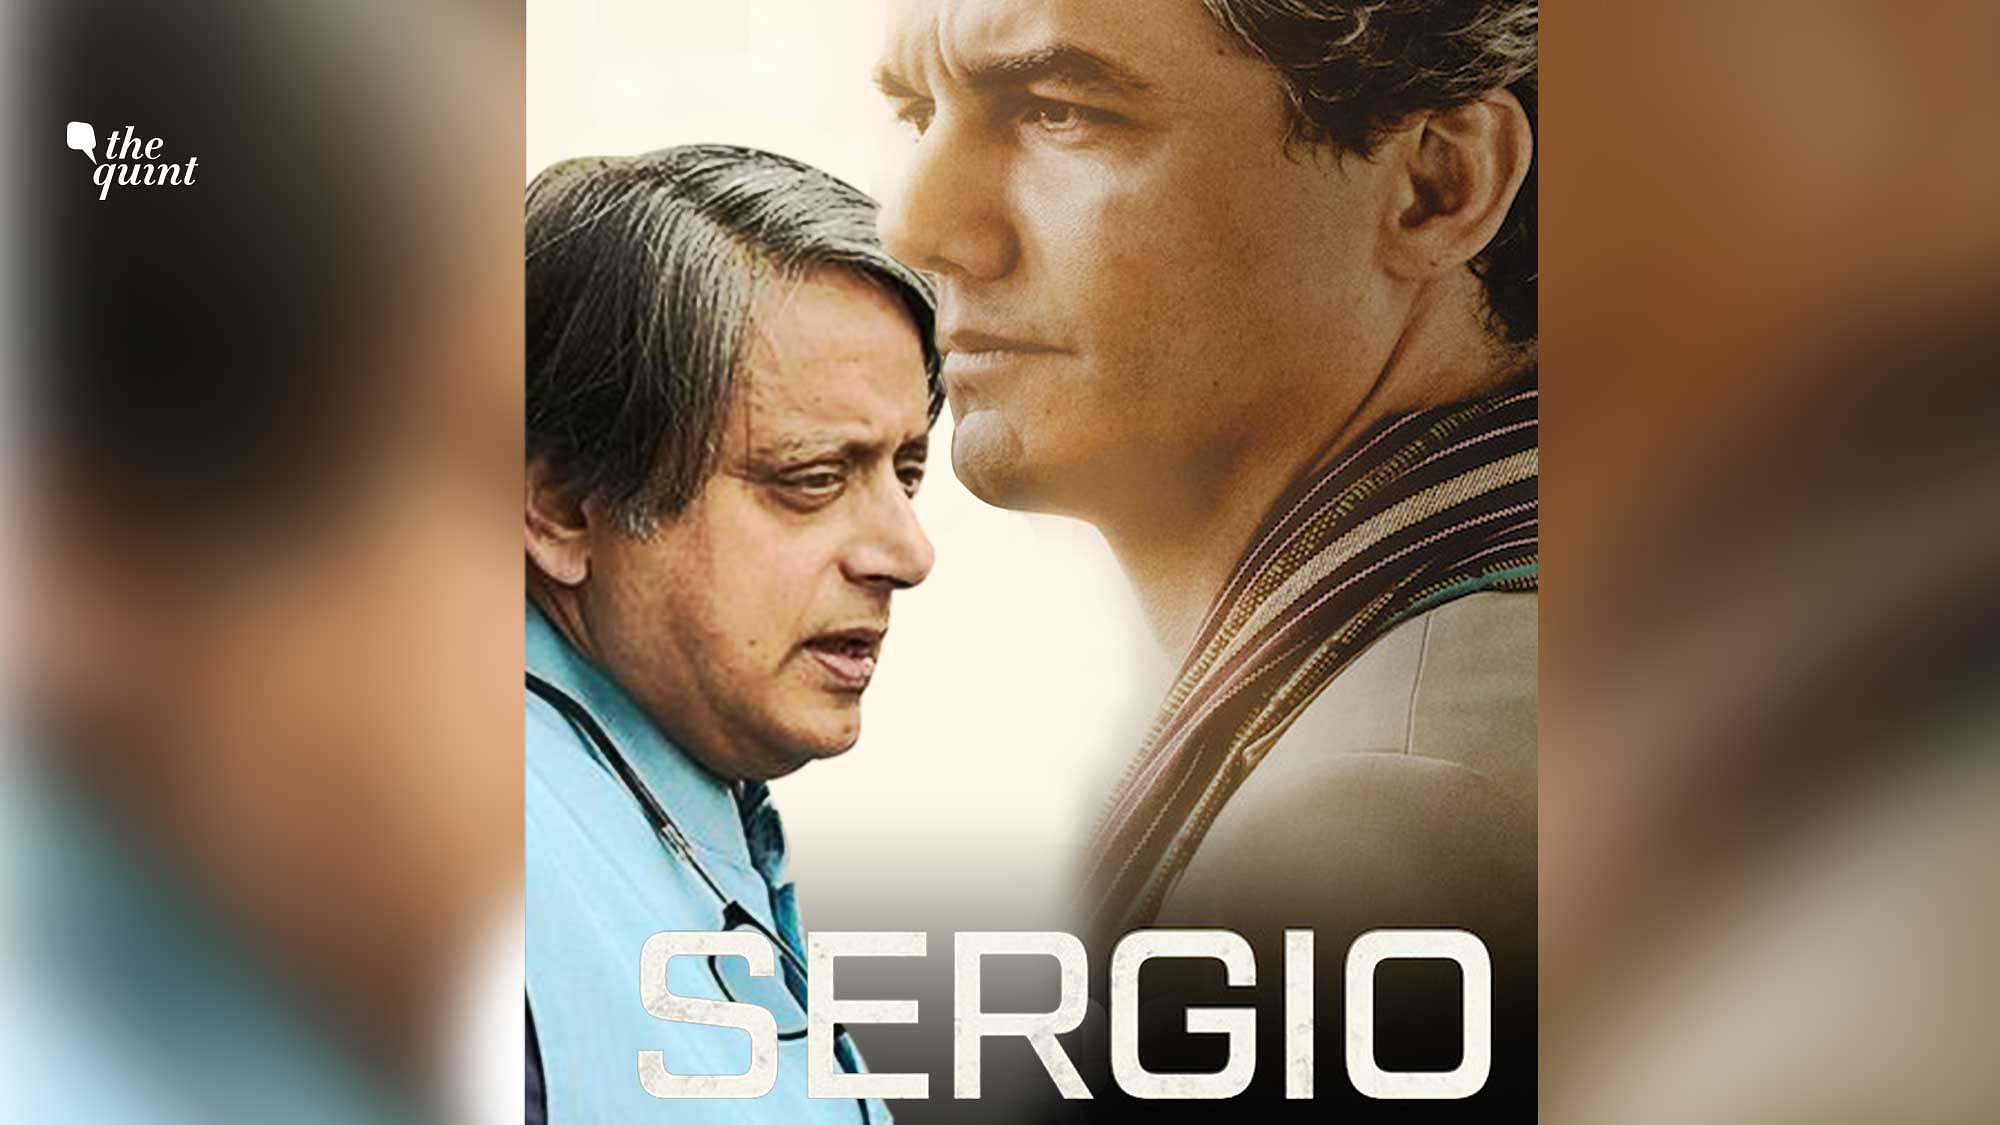 Netflix film ‘Sergio’ has reminded the world that the United Nations is not just a faceless bureaucracy.